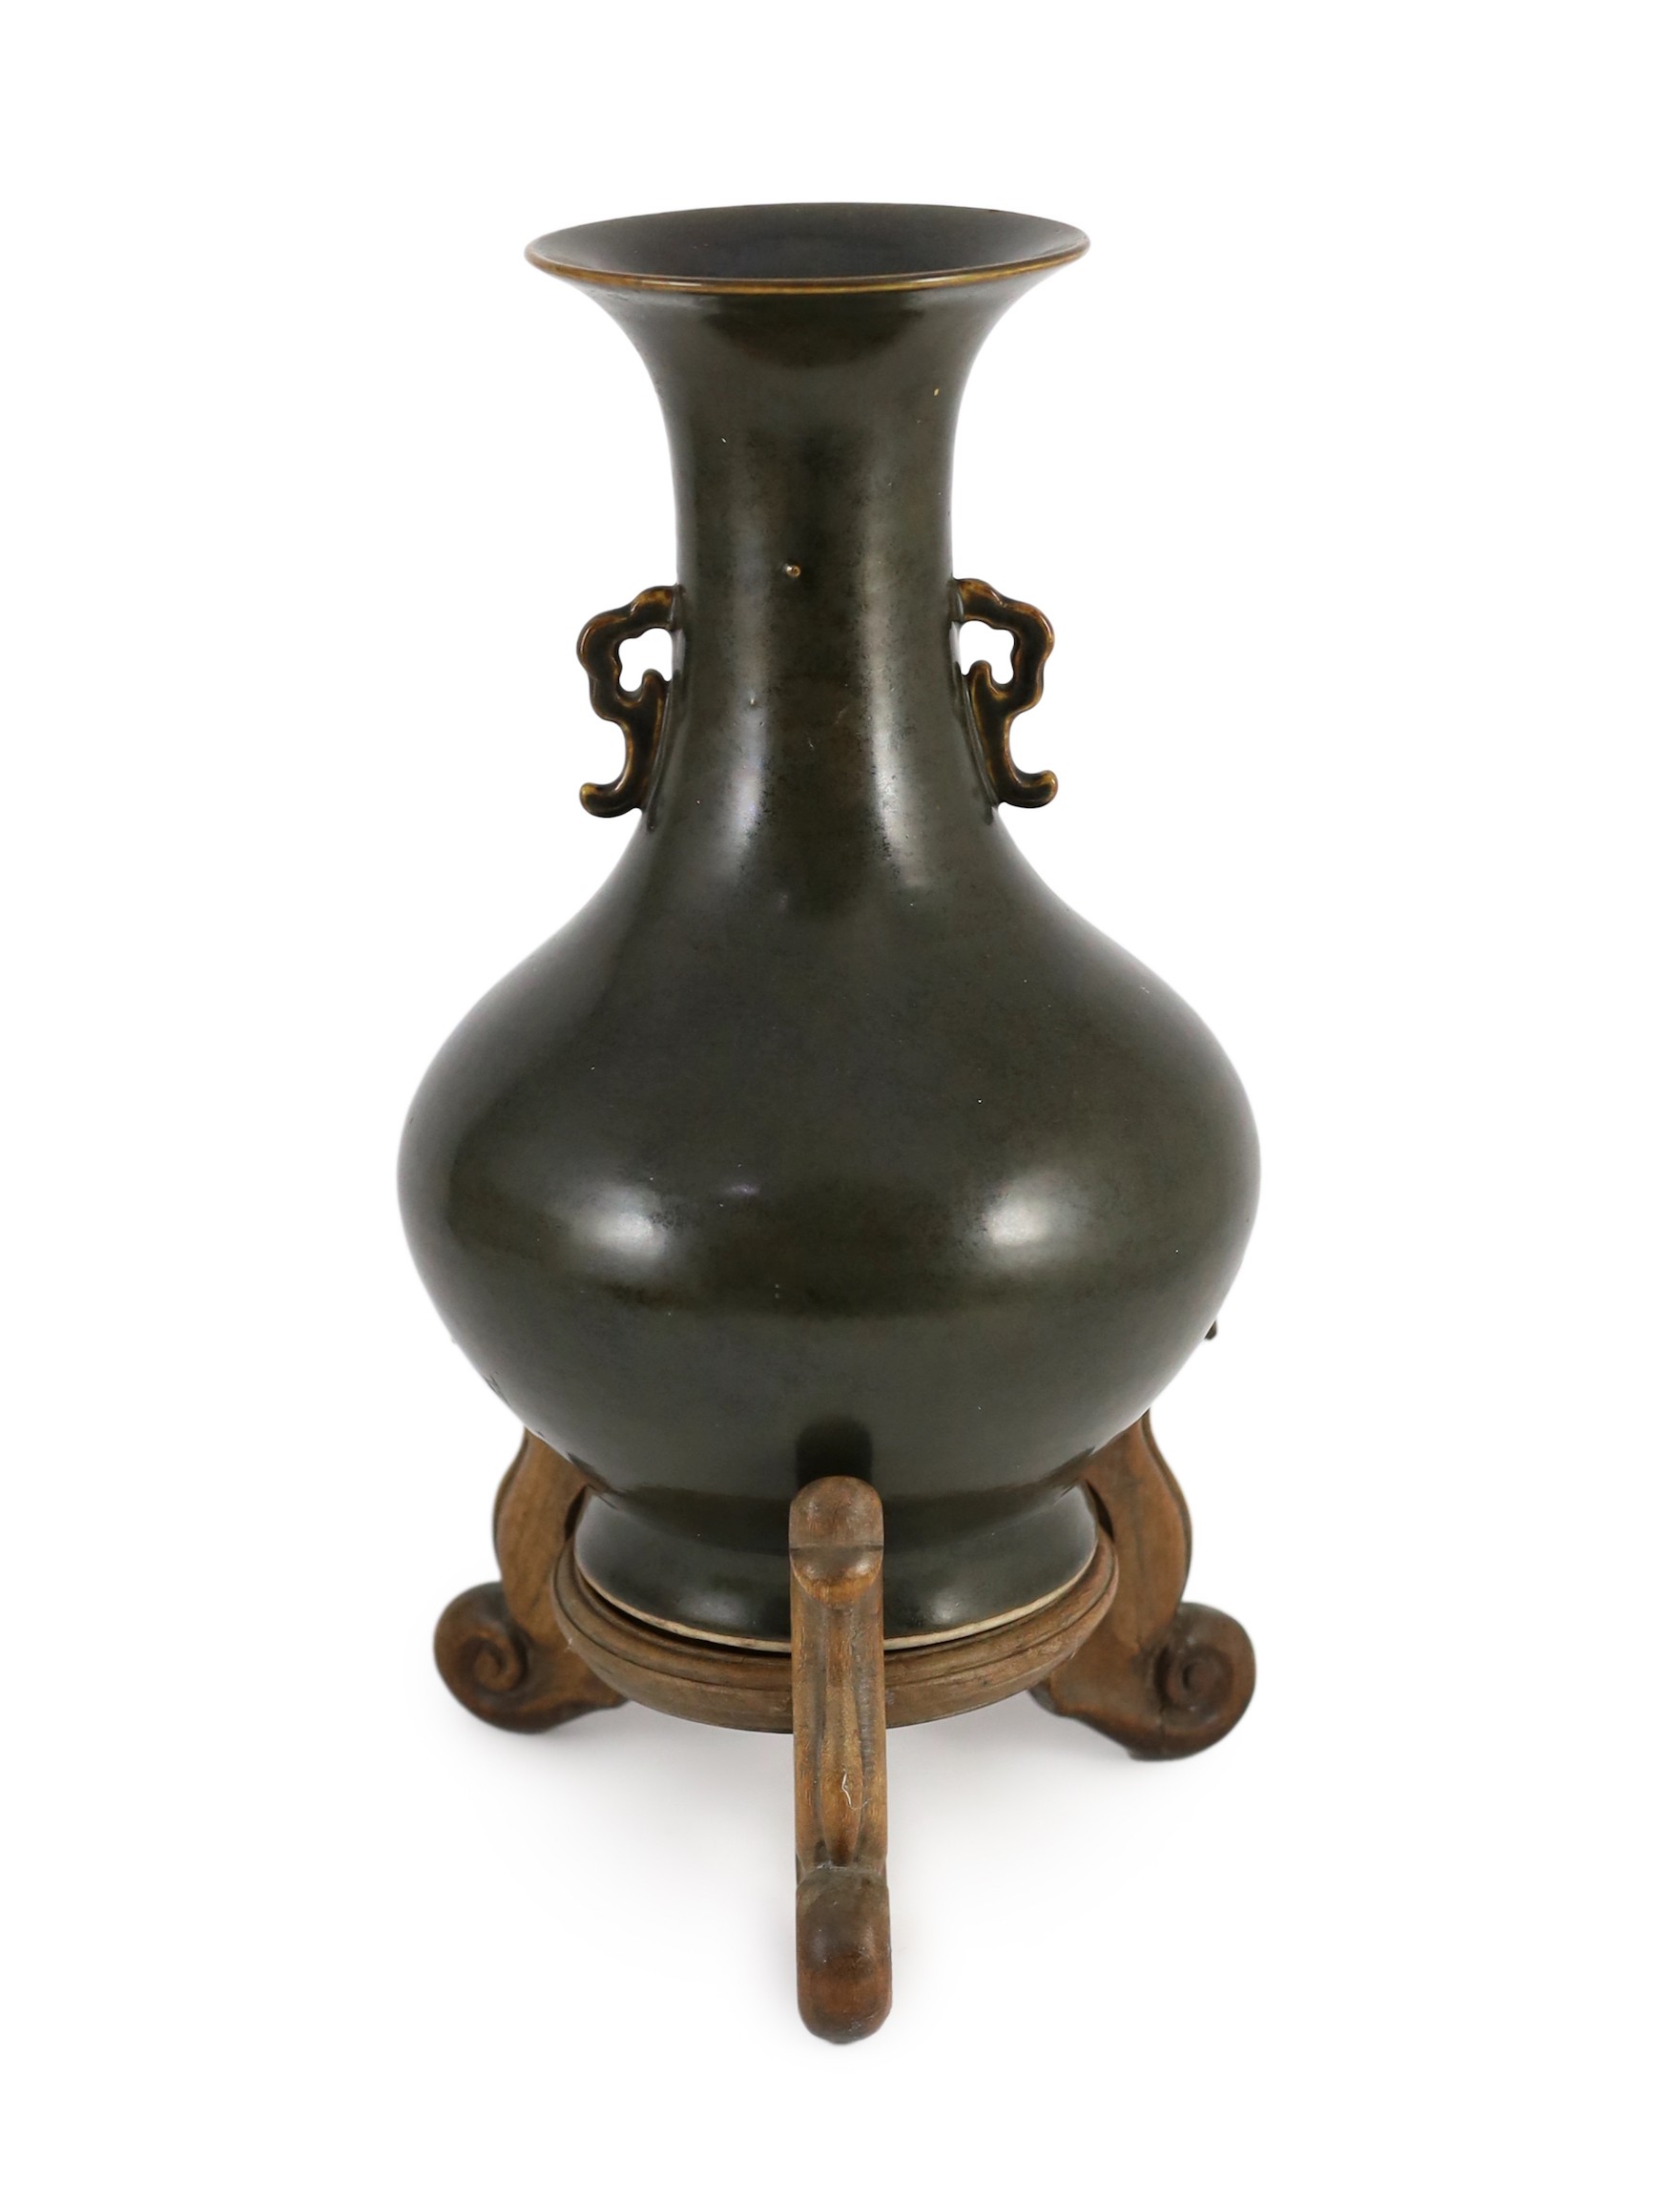 A Chinese Jian style brown glazed vase, hu, 18th/19th century, 31.5cm high, cracked, wood stand                                                                                                                             